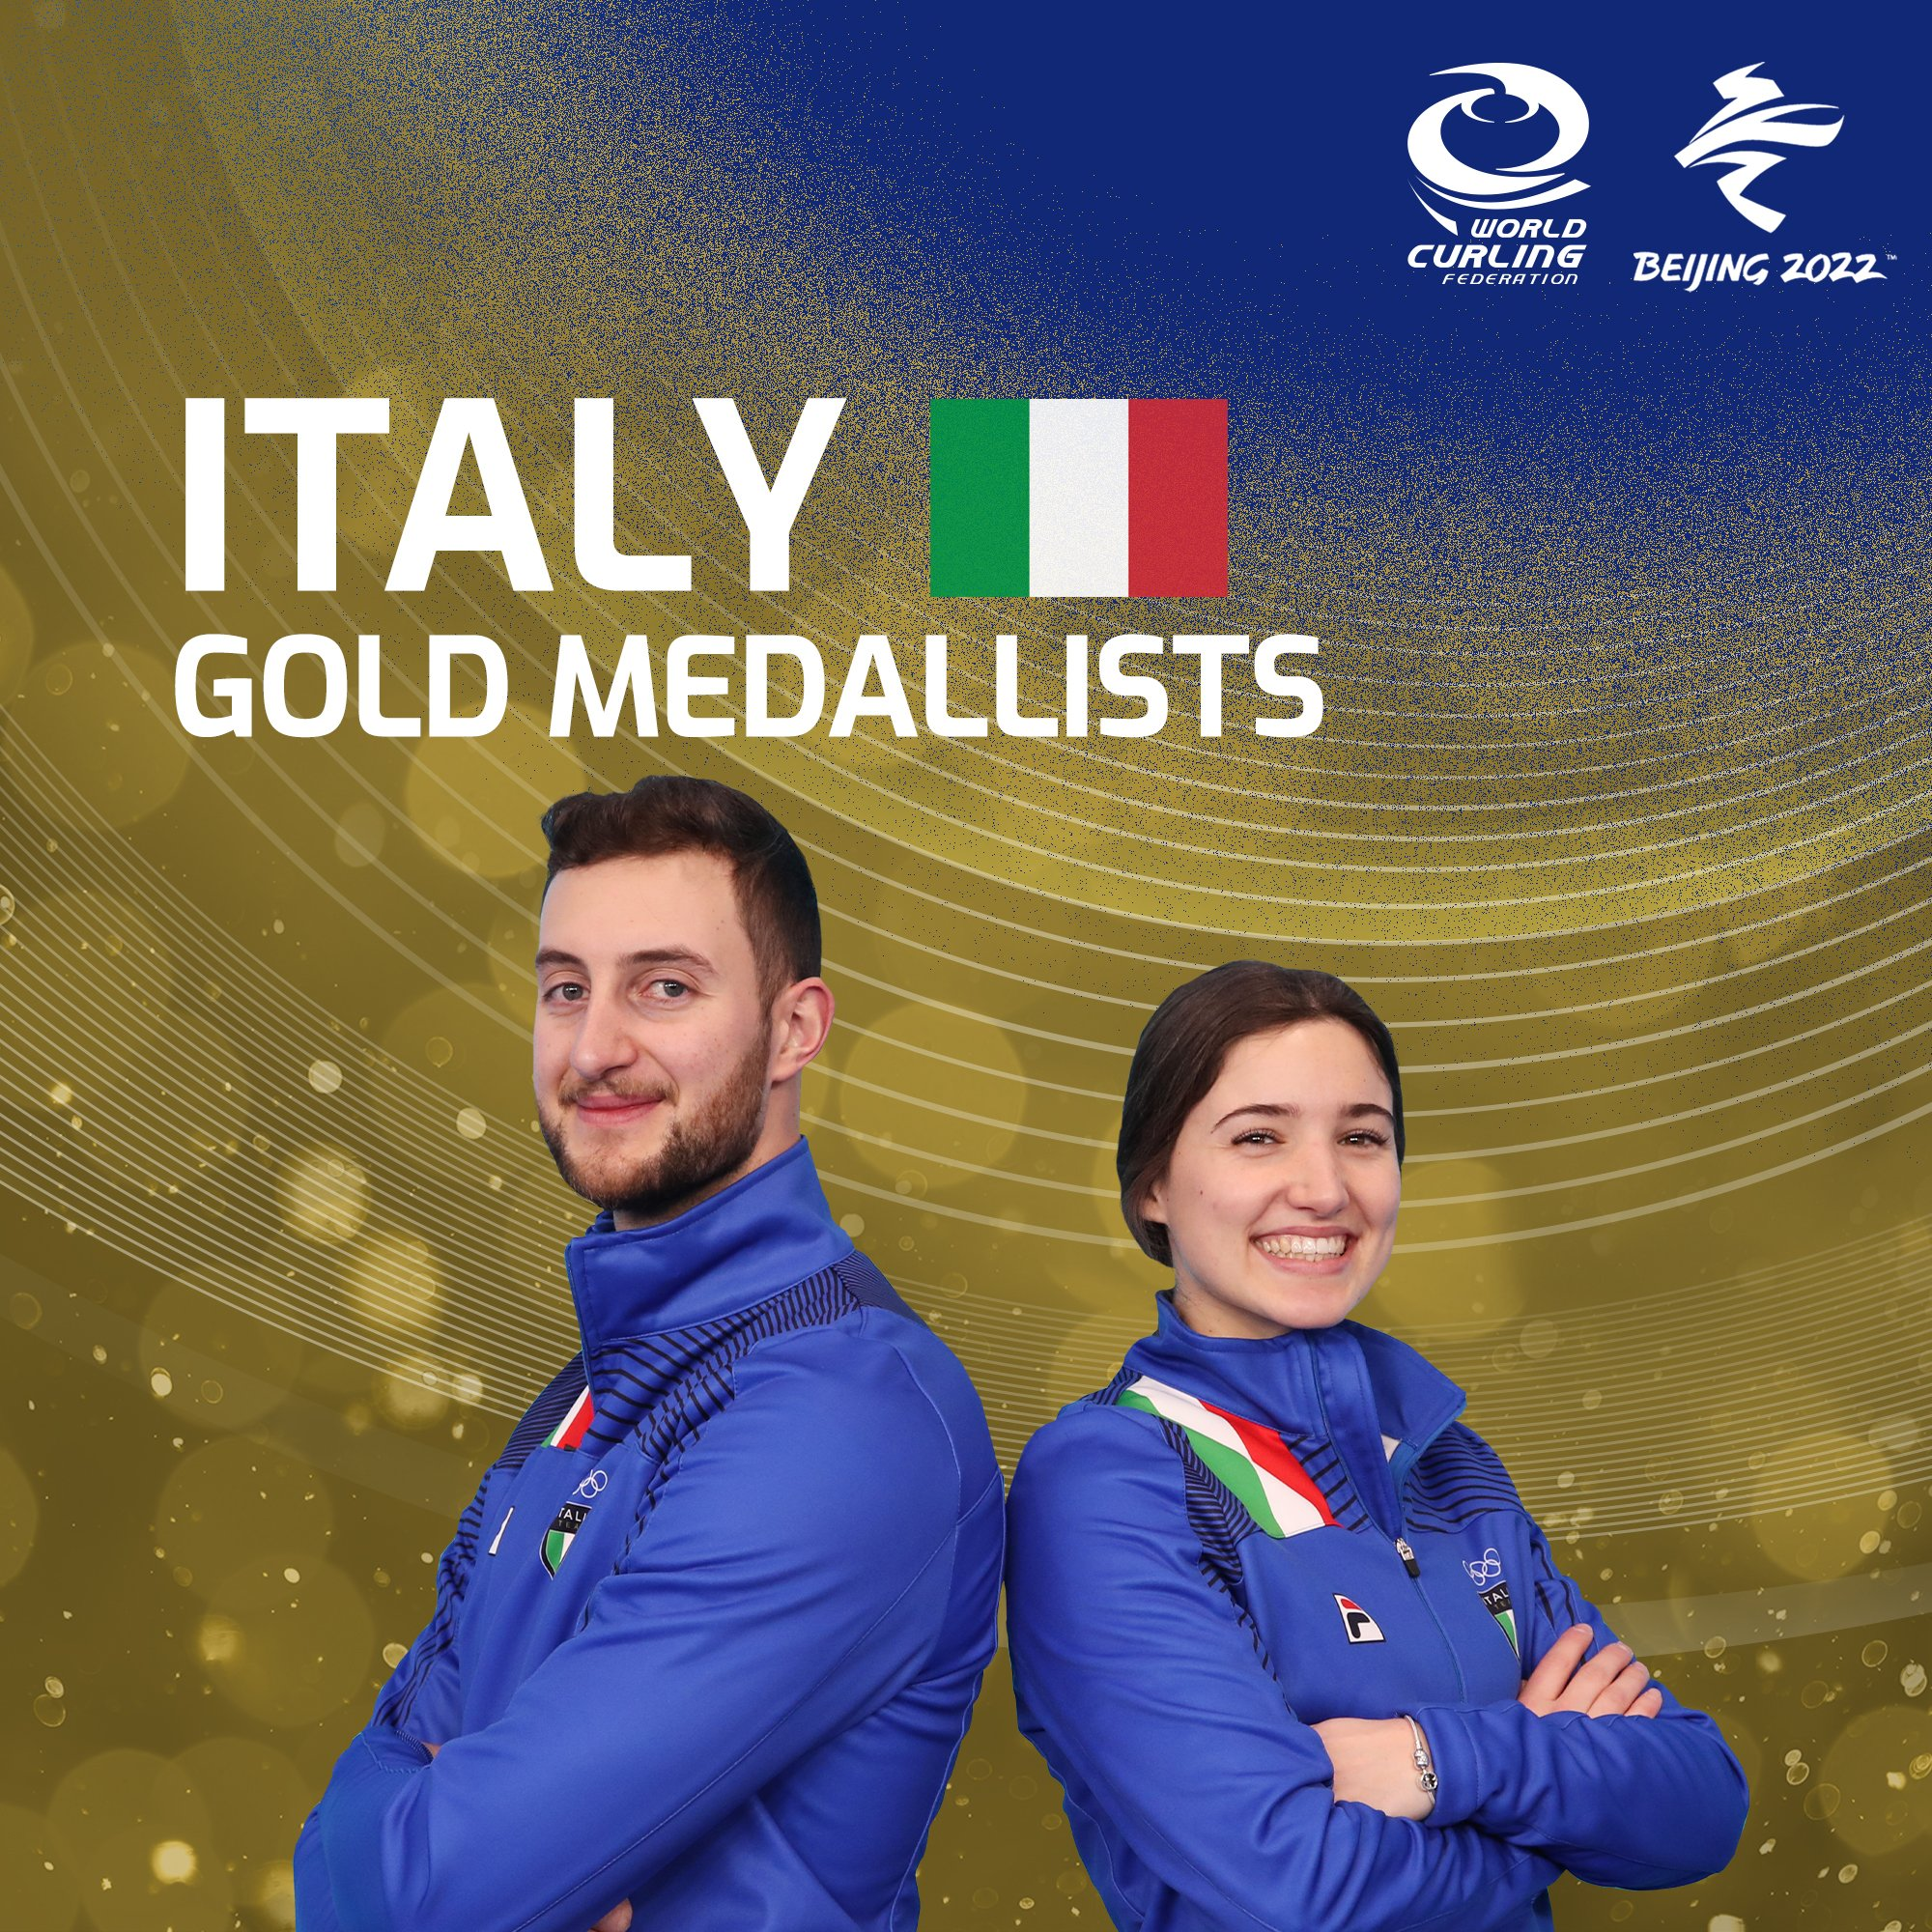 Italy's Amos Mosaner, left, and Stefania Constantini, right, won the Olympic gold medal in the mixed doubles at Beijing 2022 ©World Curling